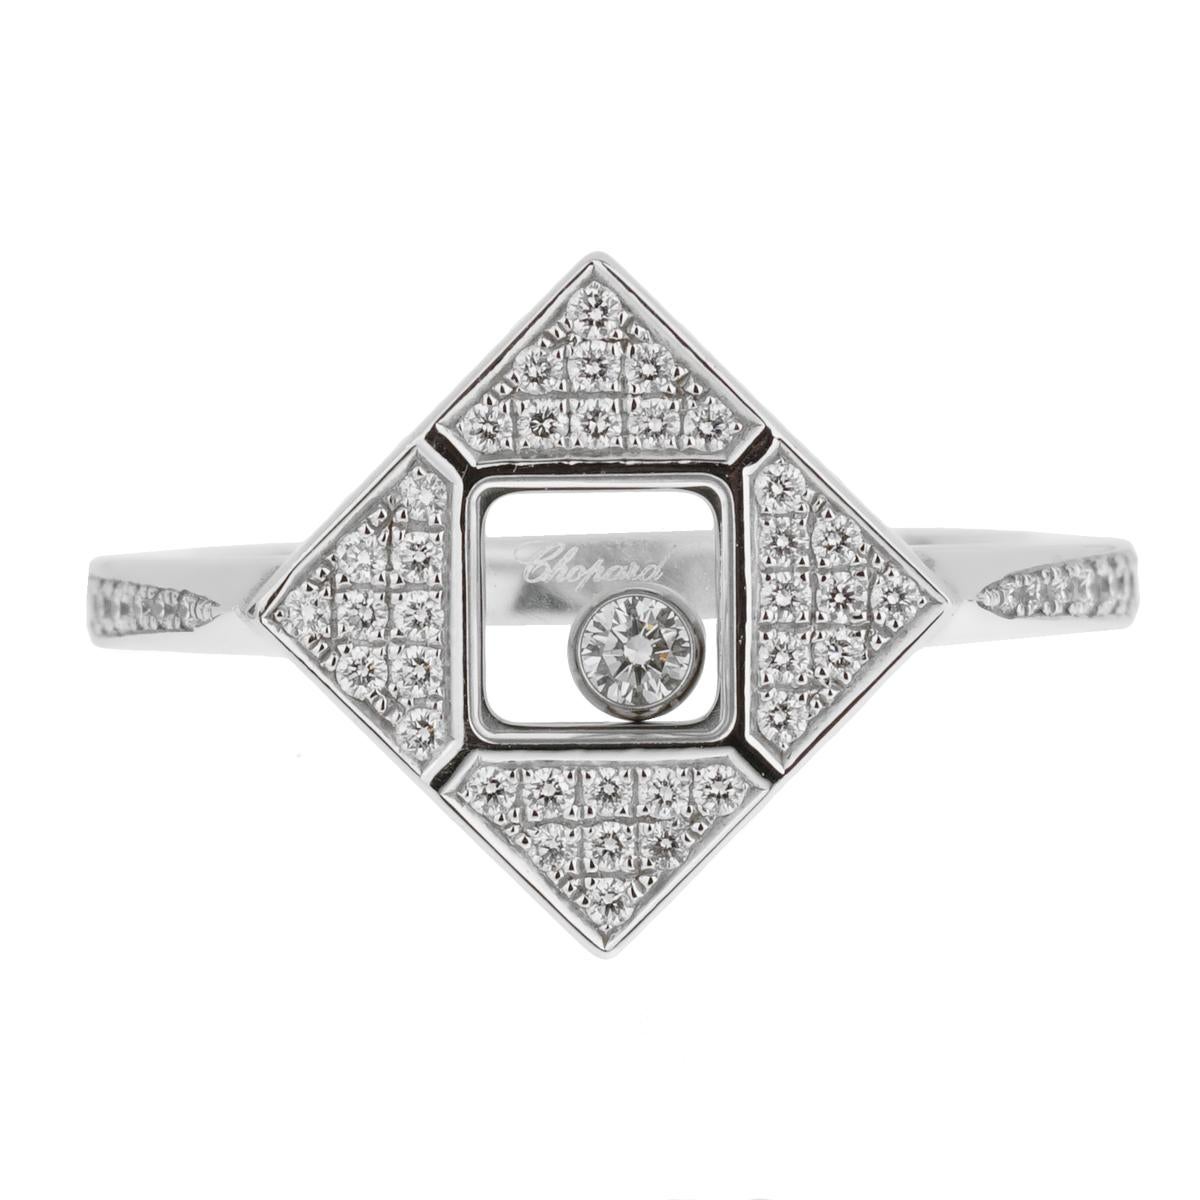 A chic Chopard diamond ring from the Happy Diamonds collection featuring a 54 round brilliant cut diamonds surrounding a floating diamond in 18k white gold.

Size 6 3/4
Sku: 1732